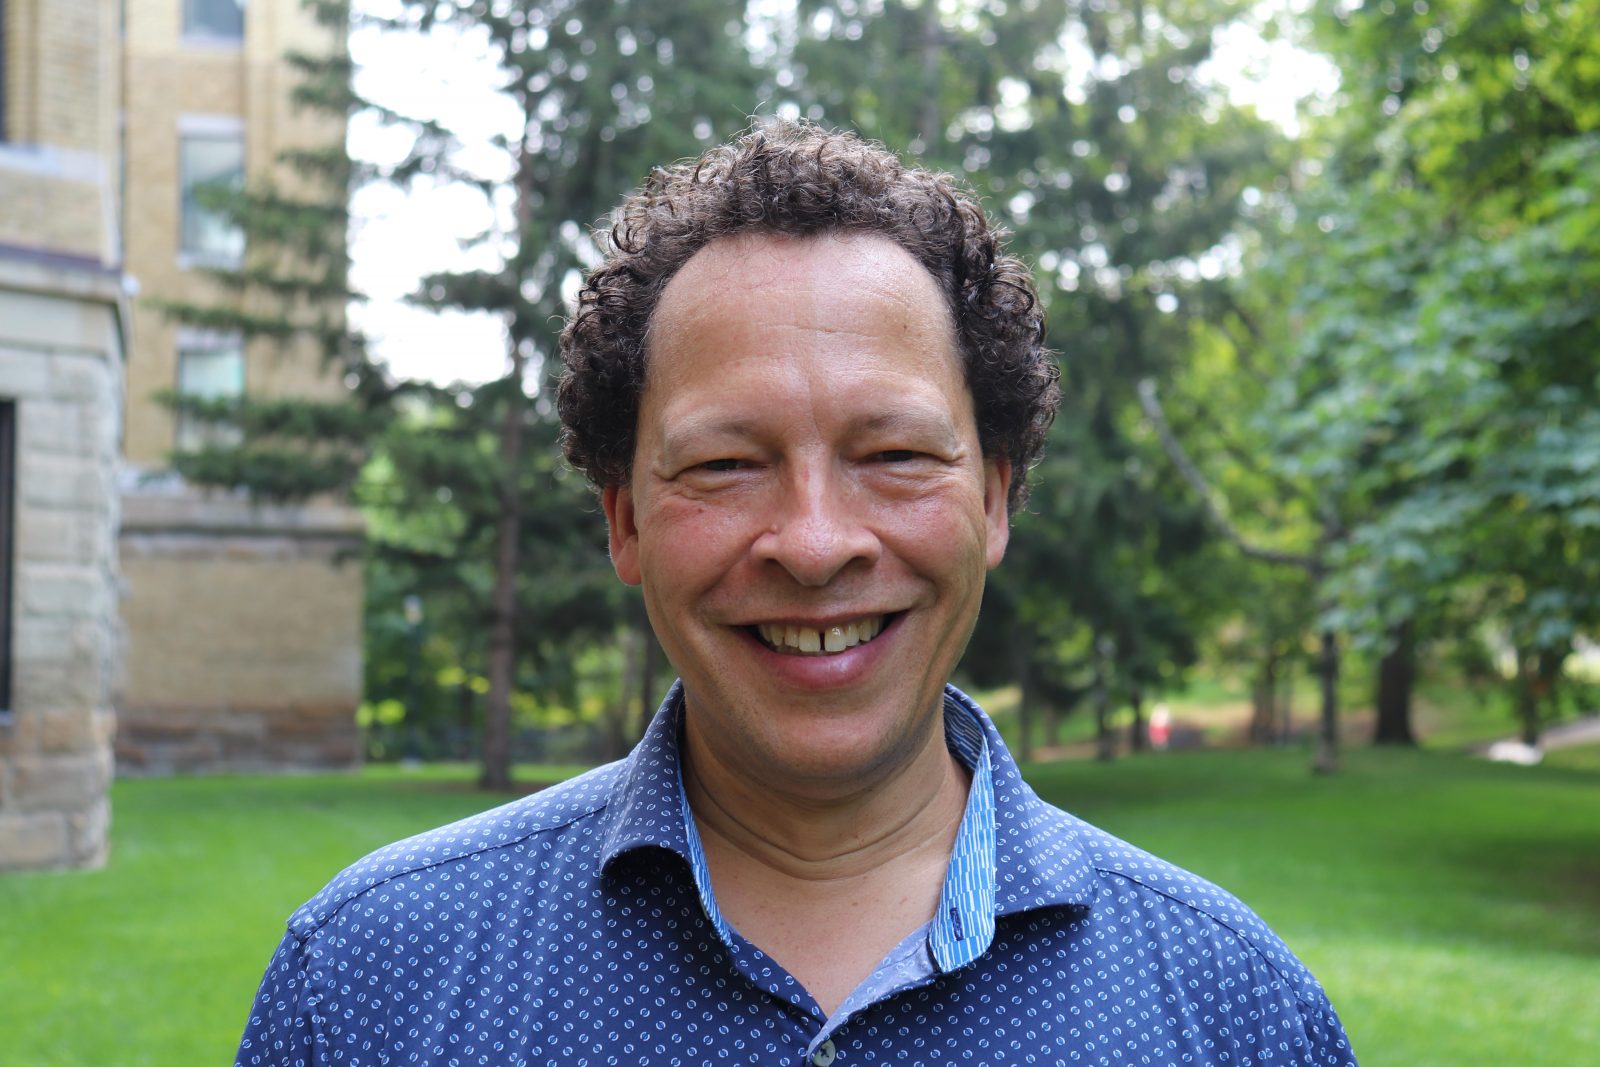 A head-and-shoulders photo of author Lawrence Hill